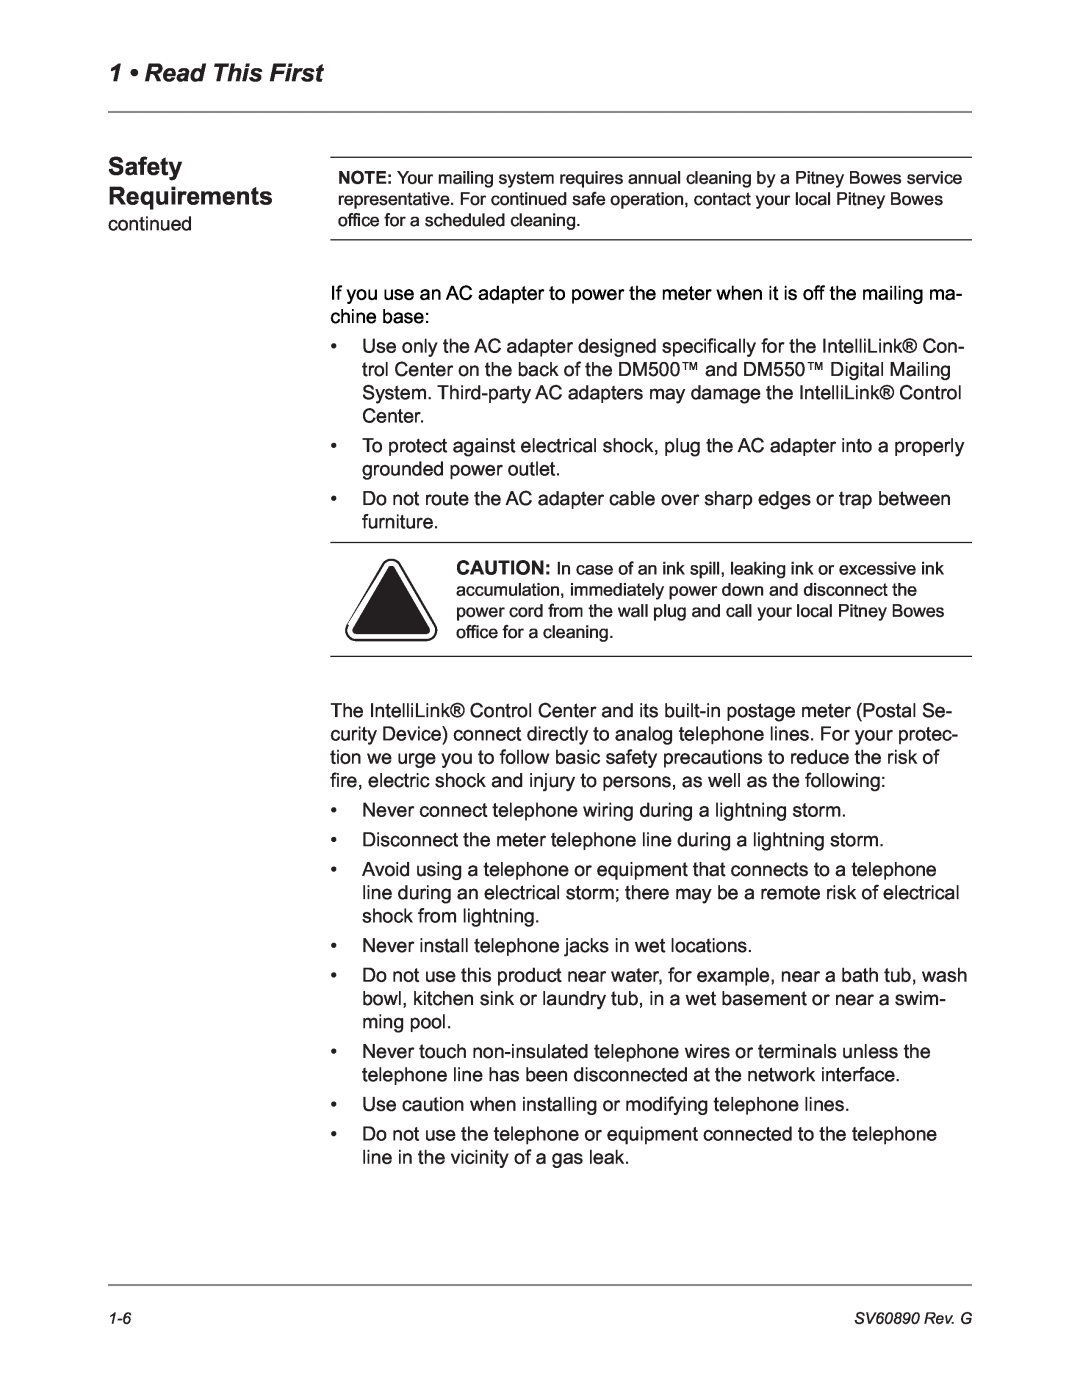 Pitney Bowes DM550, DM500 manual Read This First, Safety Requirements, continued 